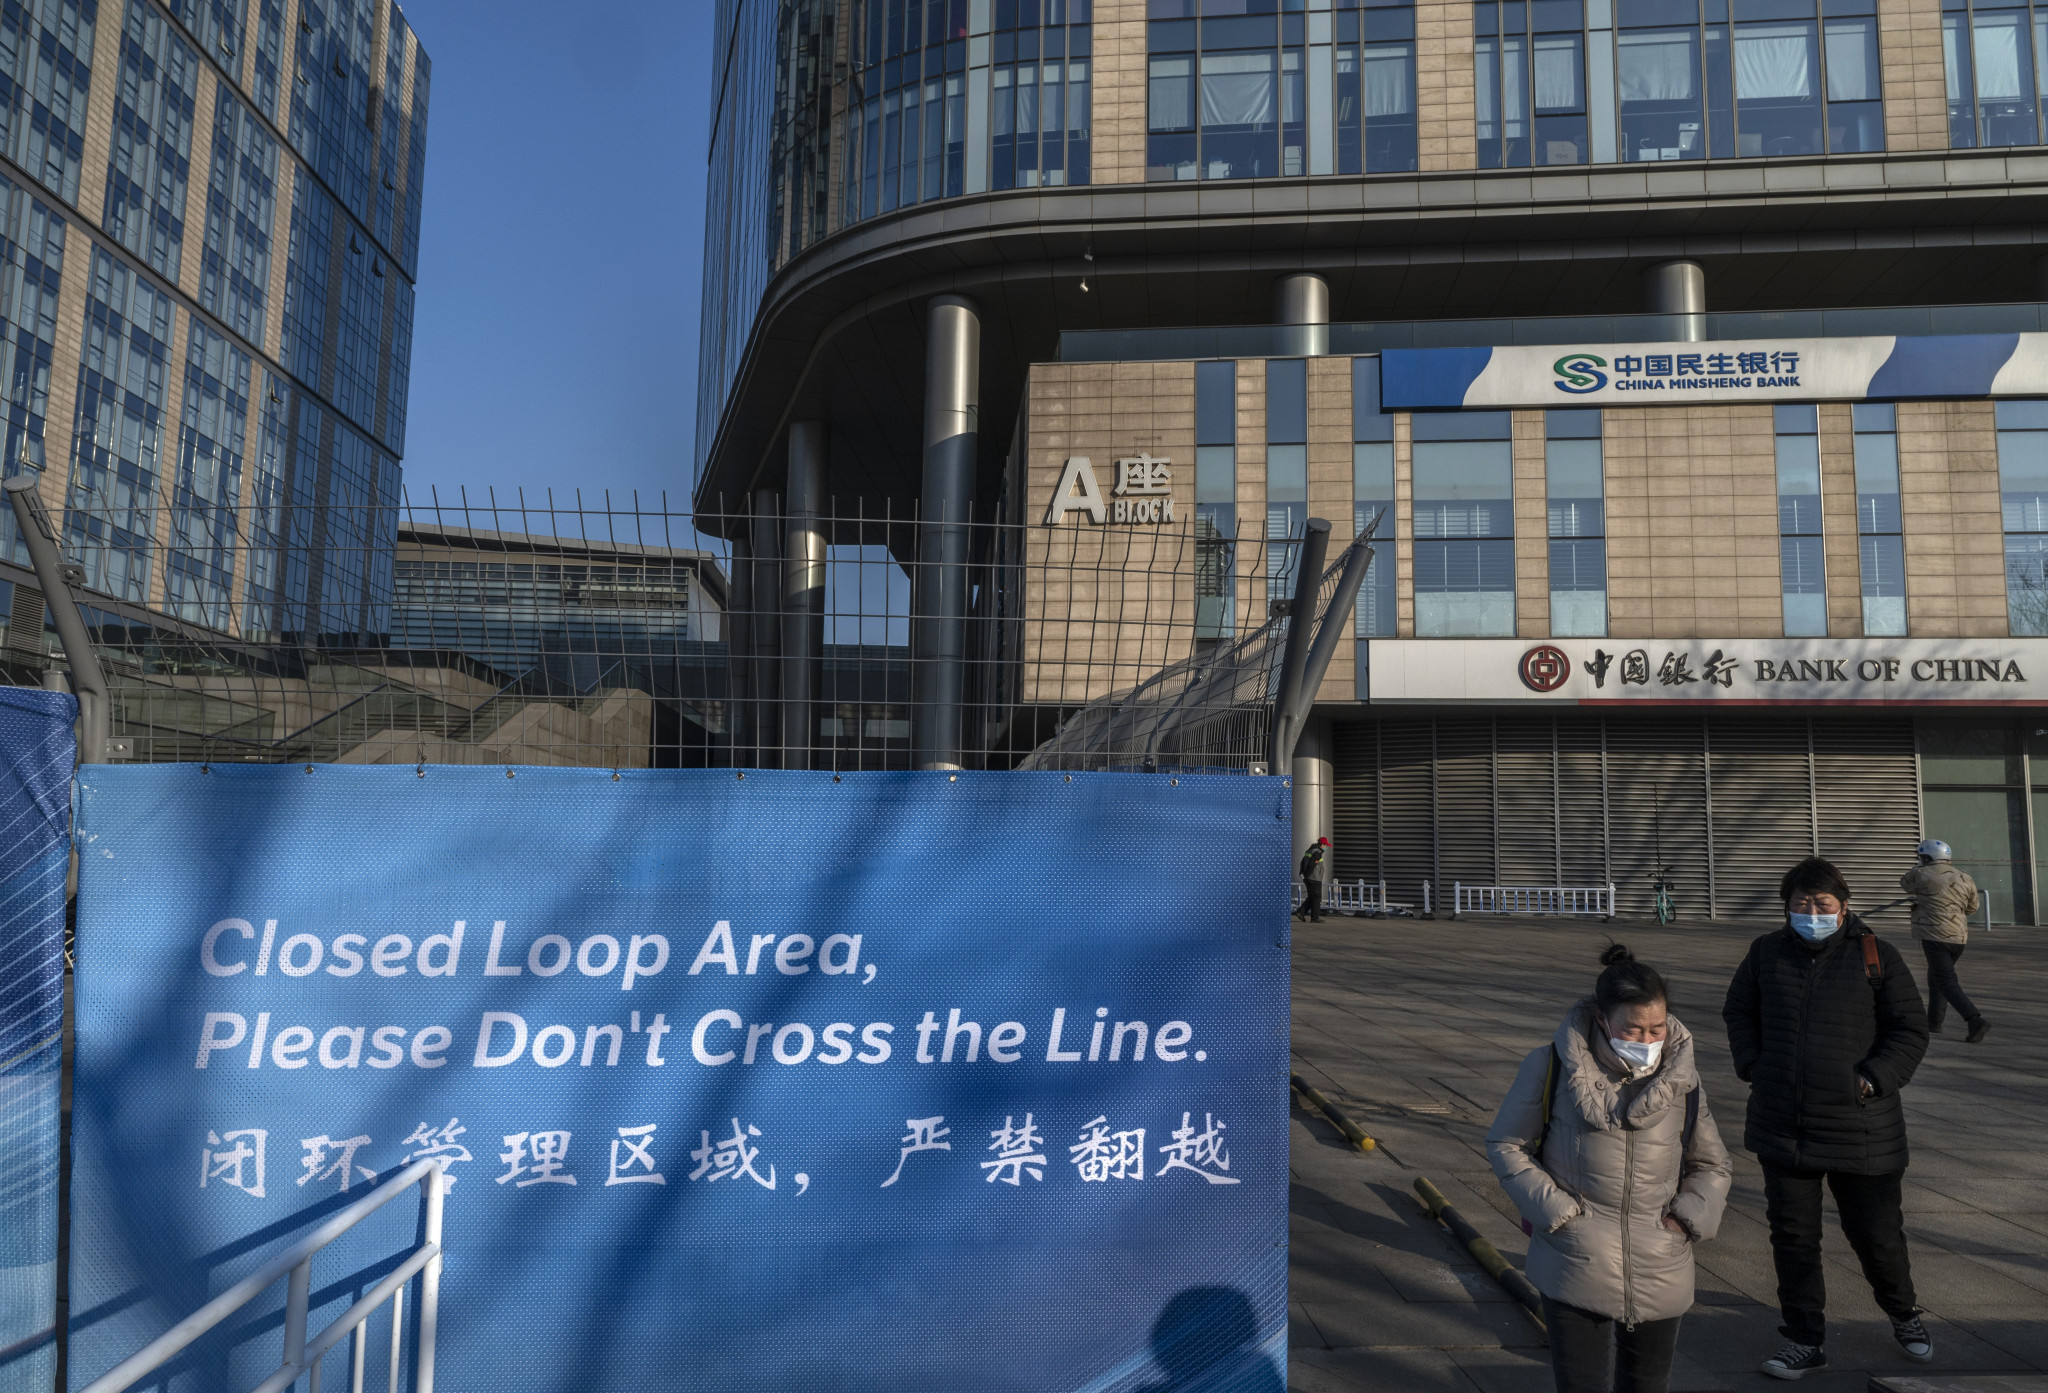 Beijing 2022 report no new COVID cases inside closed loop for first time